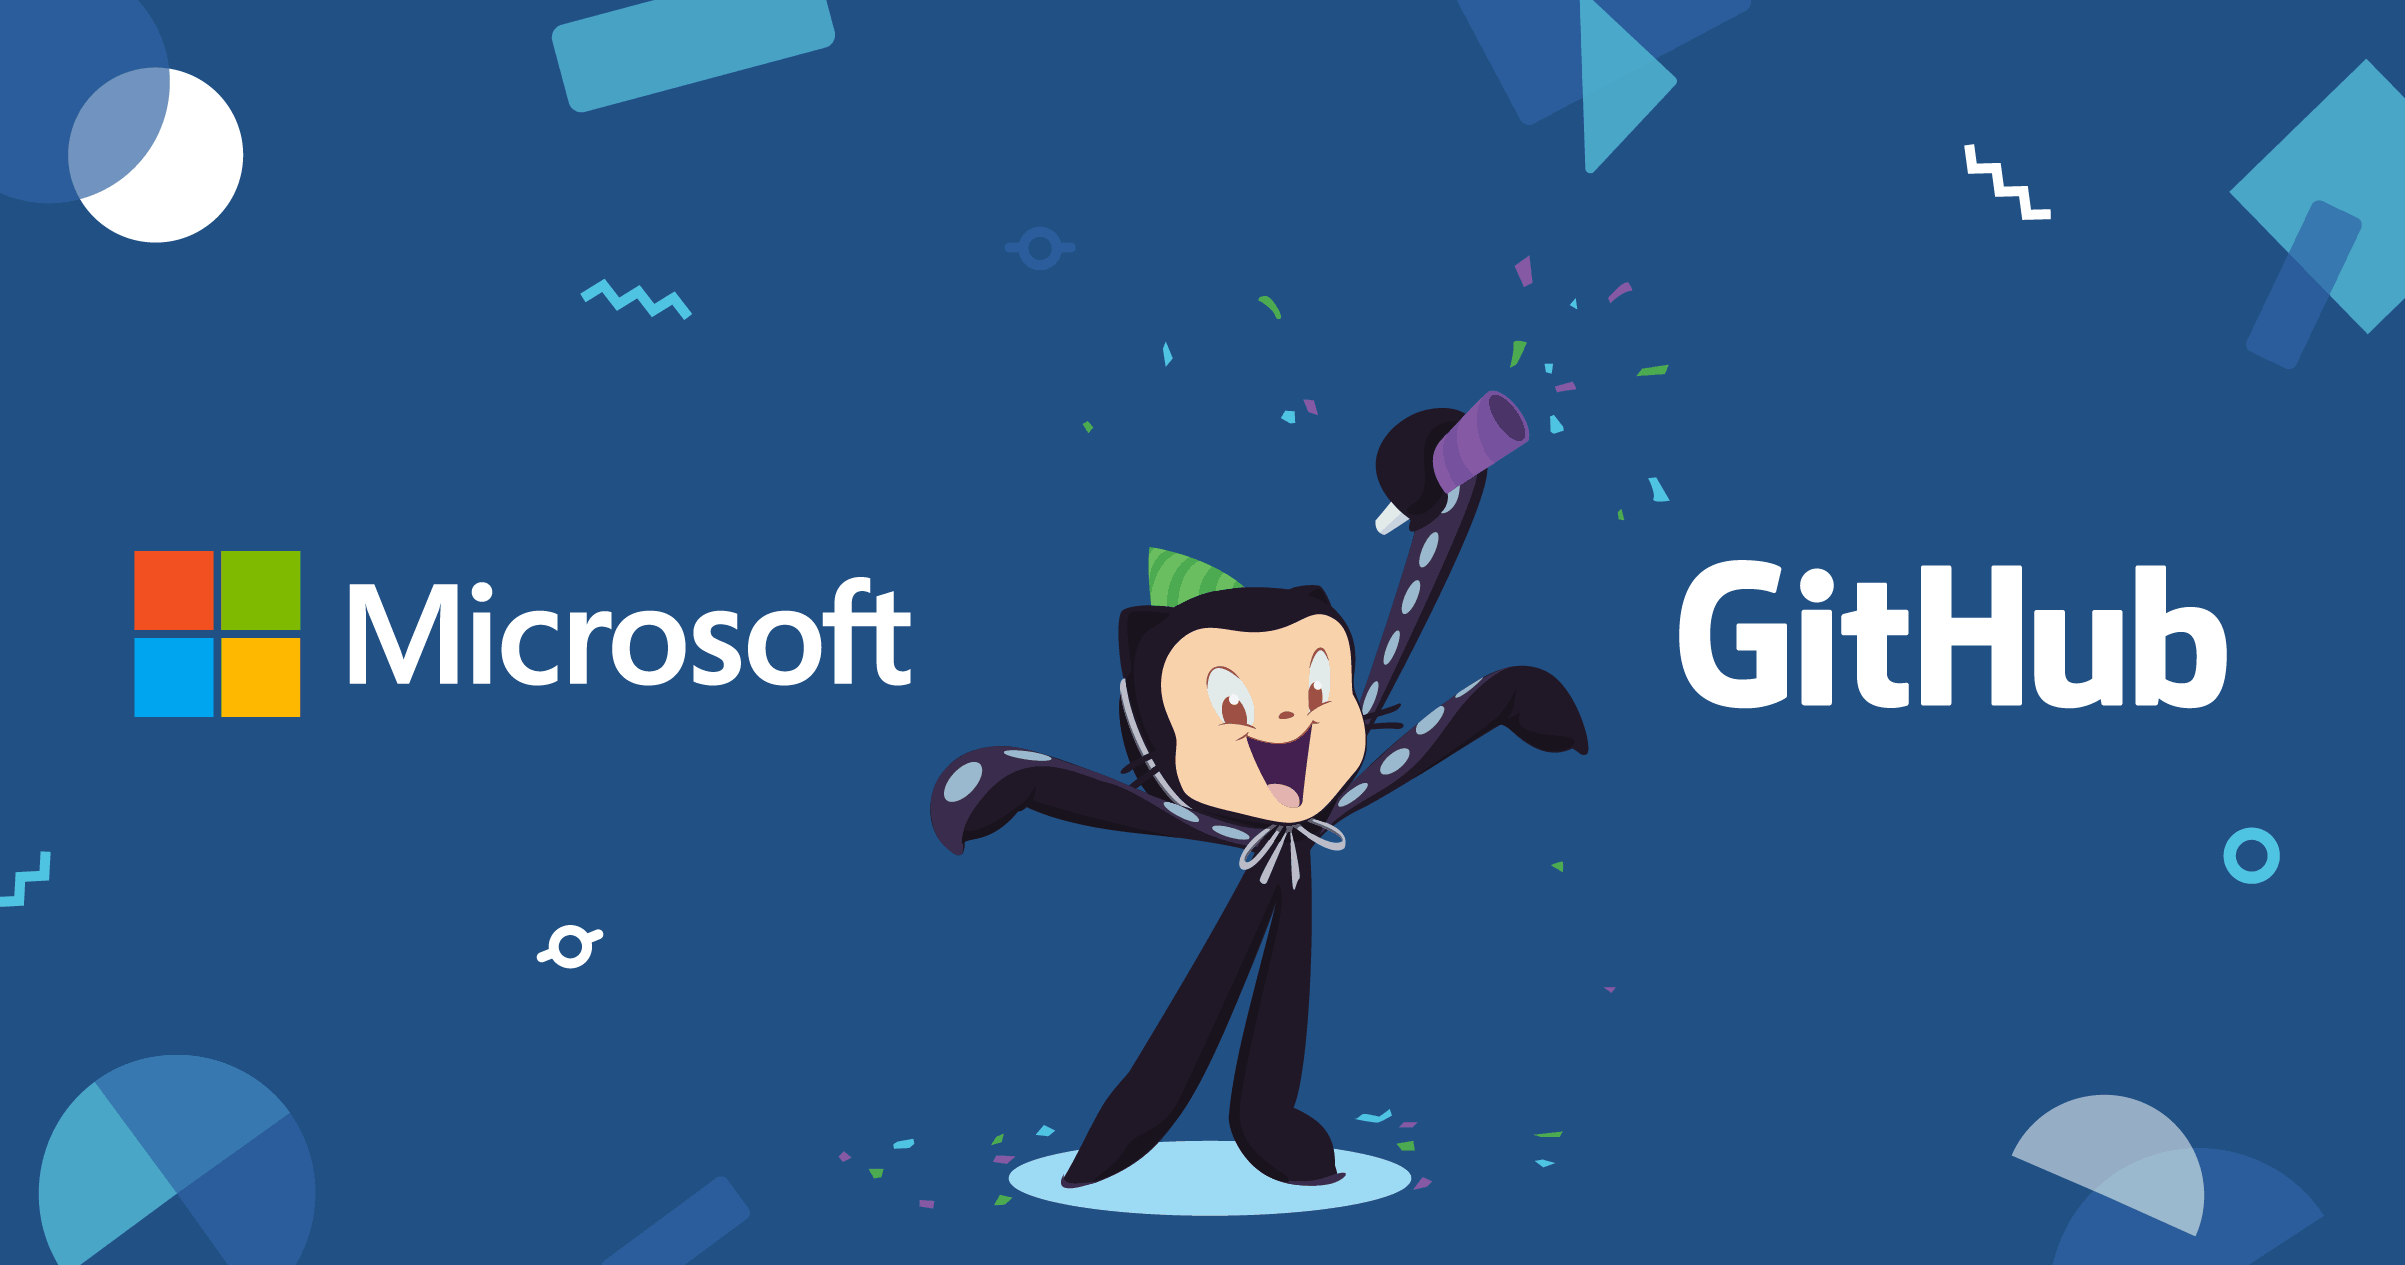 GitHub releases new "gh" command line tool in beta - OnMSFT.com - February 13, 2020